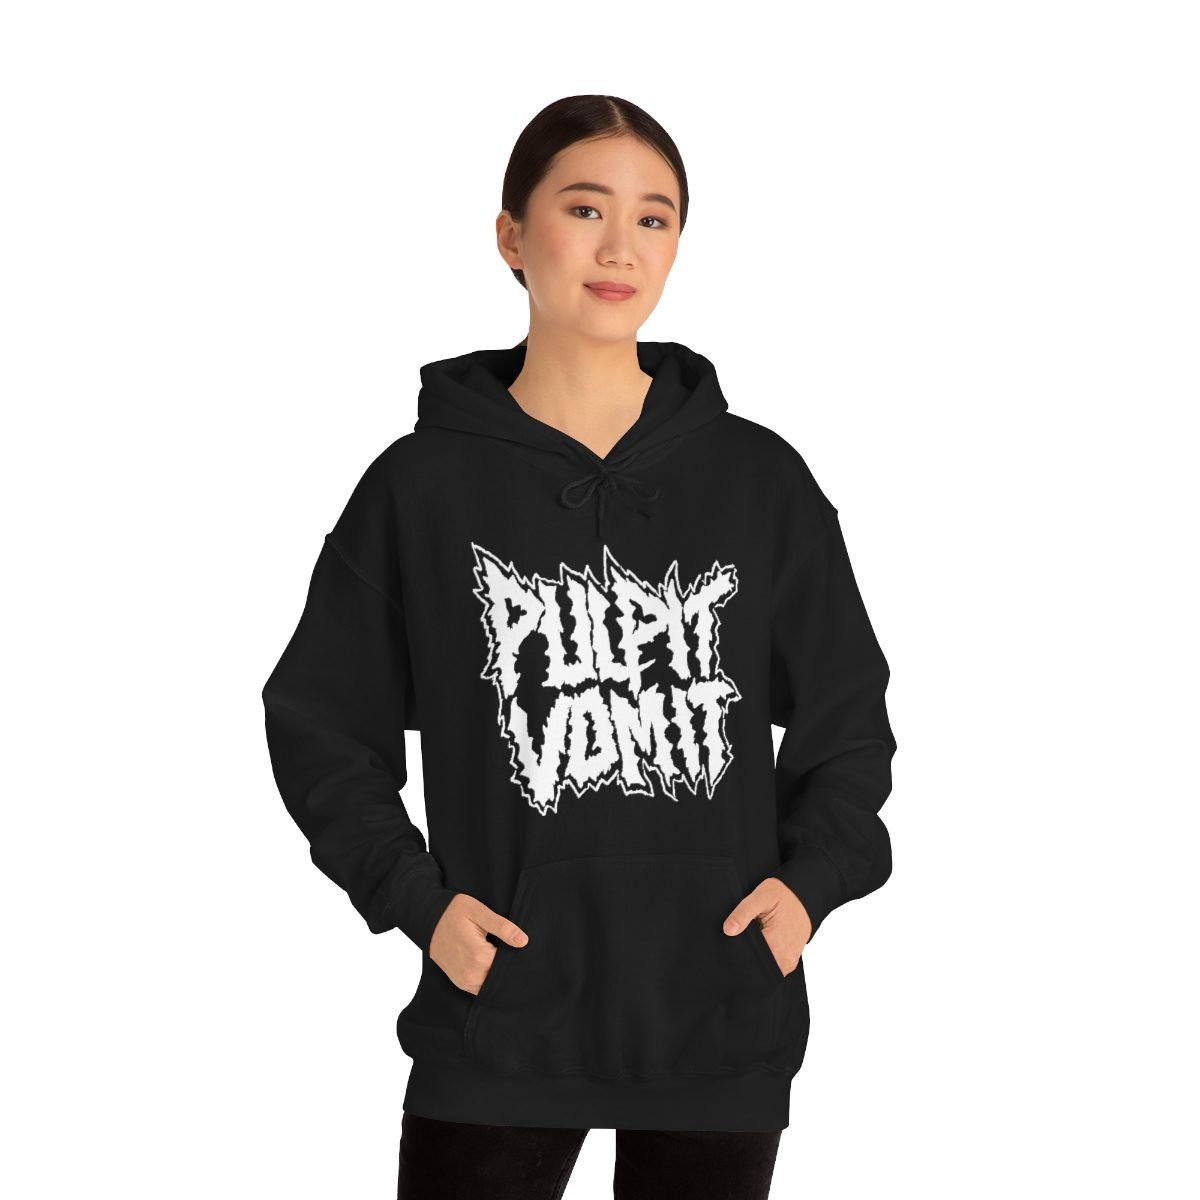 Pulpit Vomit Logo (The Charon Collective) Pullover Hooded Sweatshirt 185MD